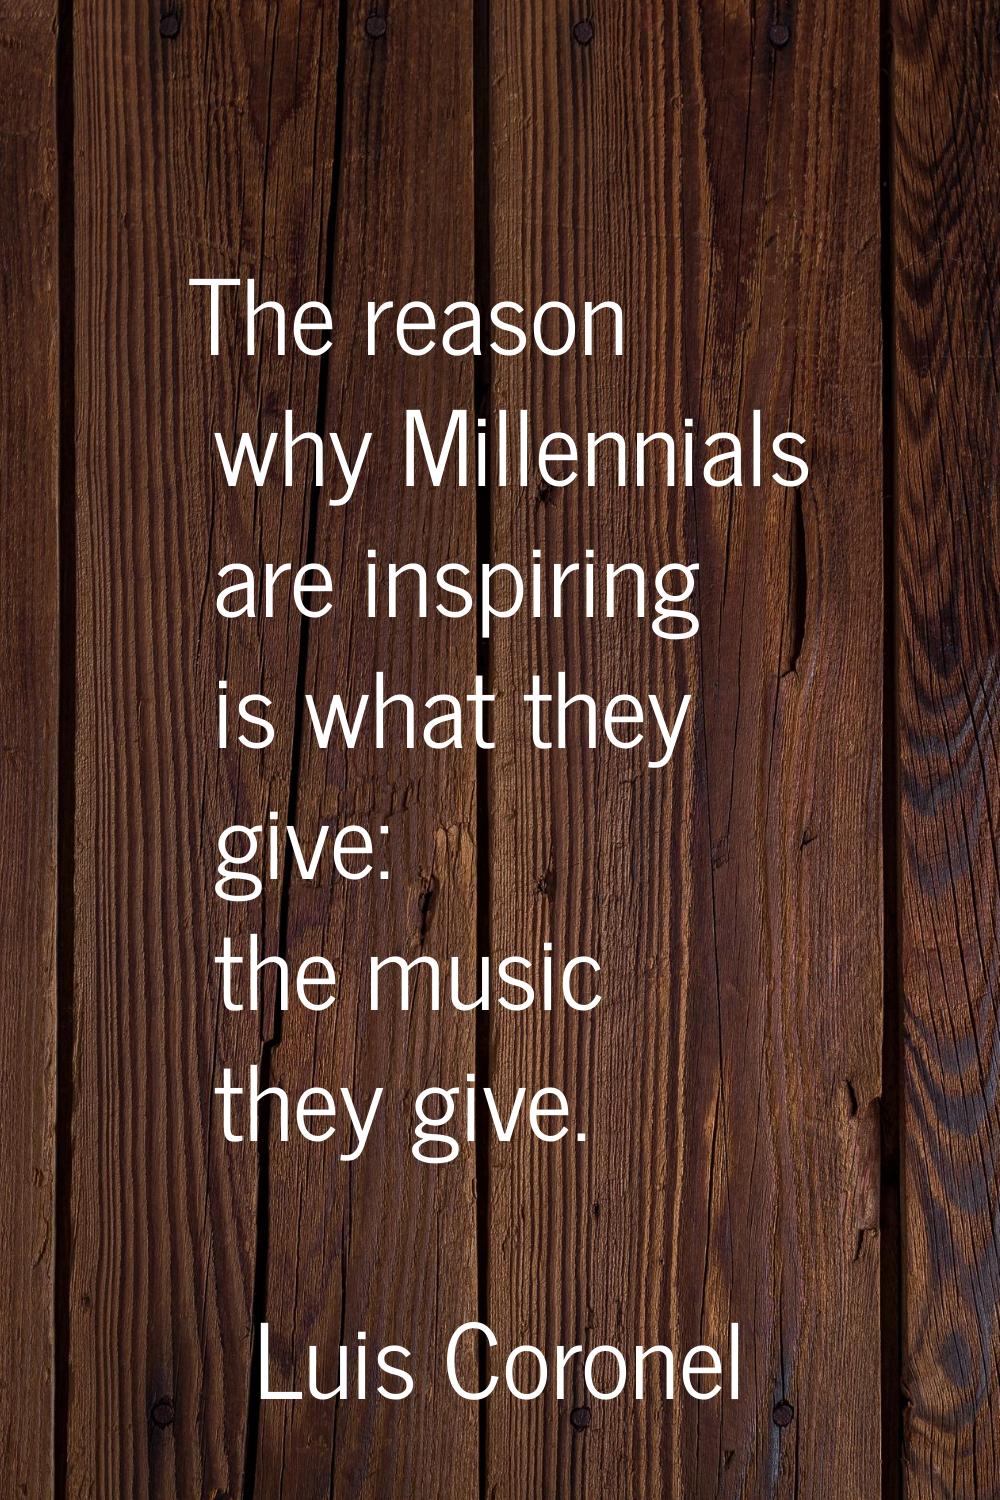 The reason why Millennials are inspiring is what they give: the music they give.